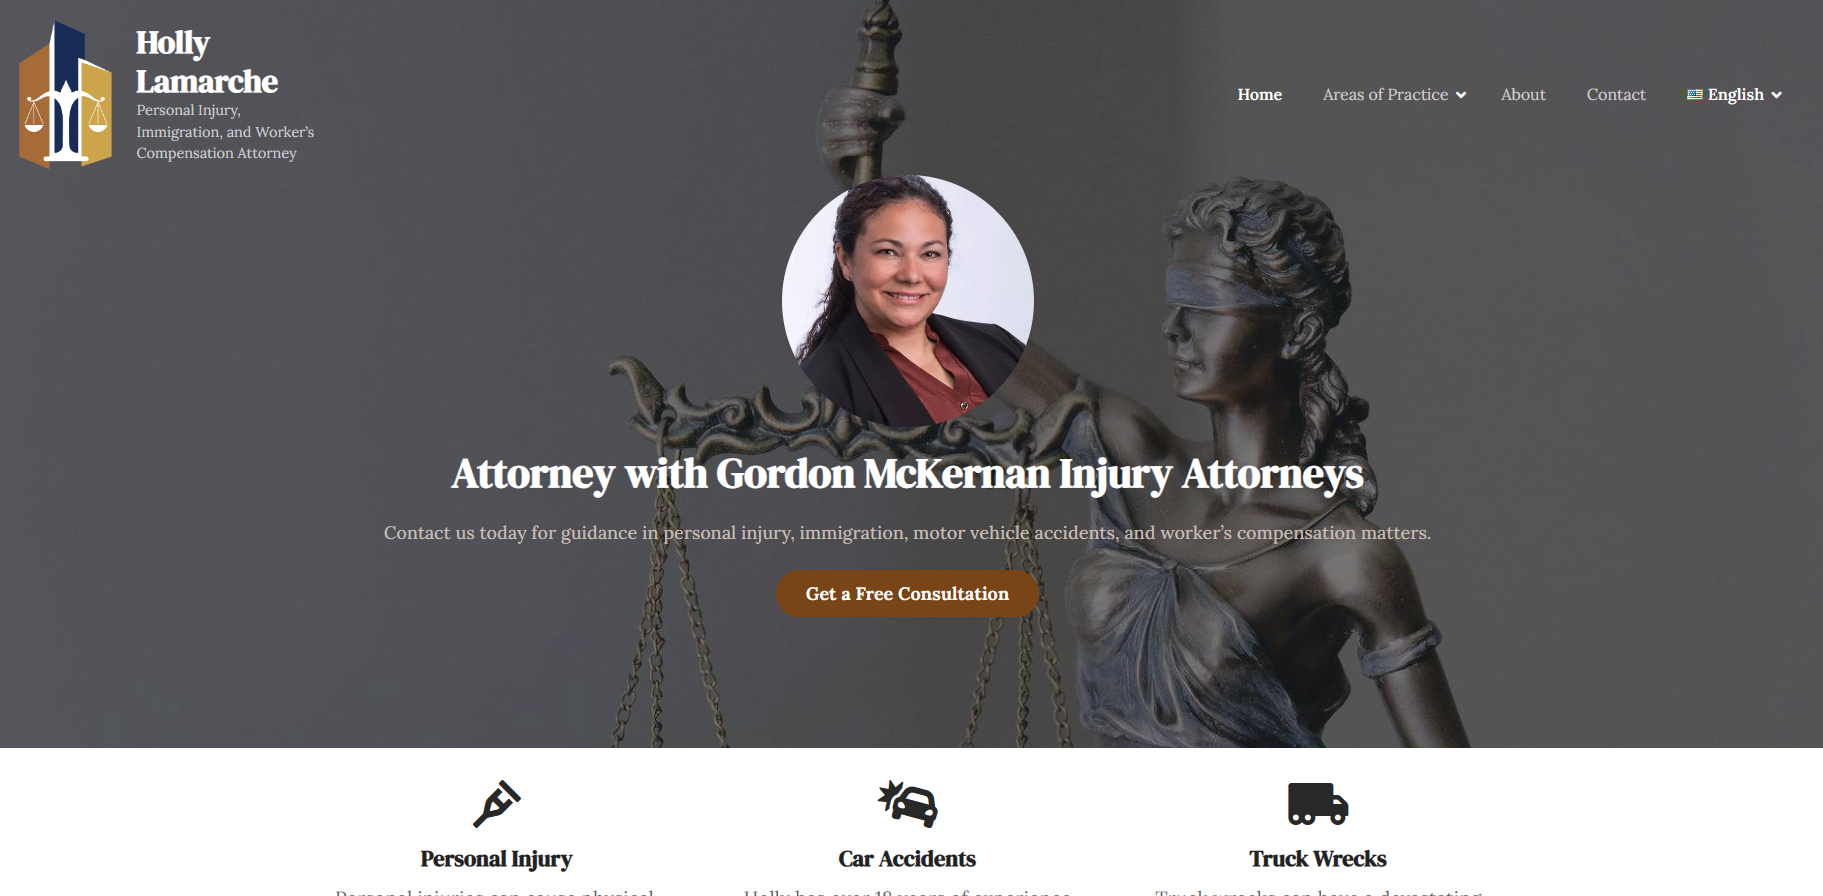 Lafayette Attorney Holly Lamarche’s Website Redesign